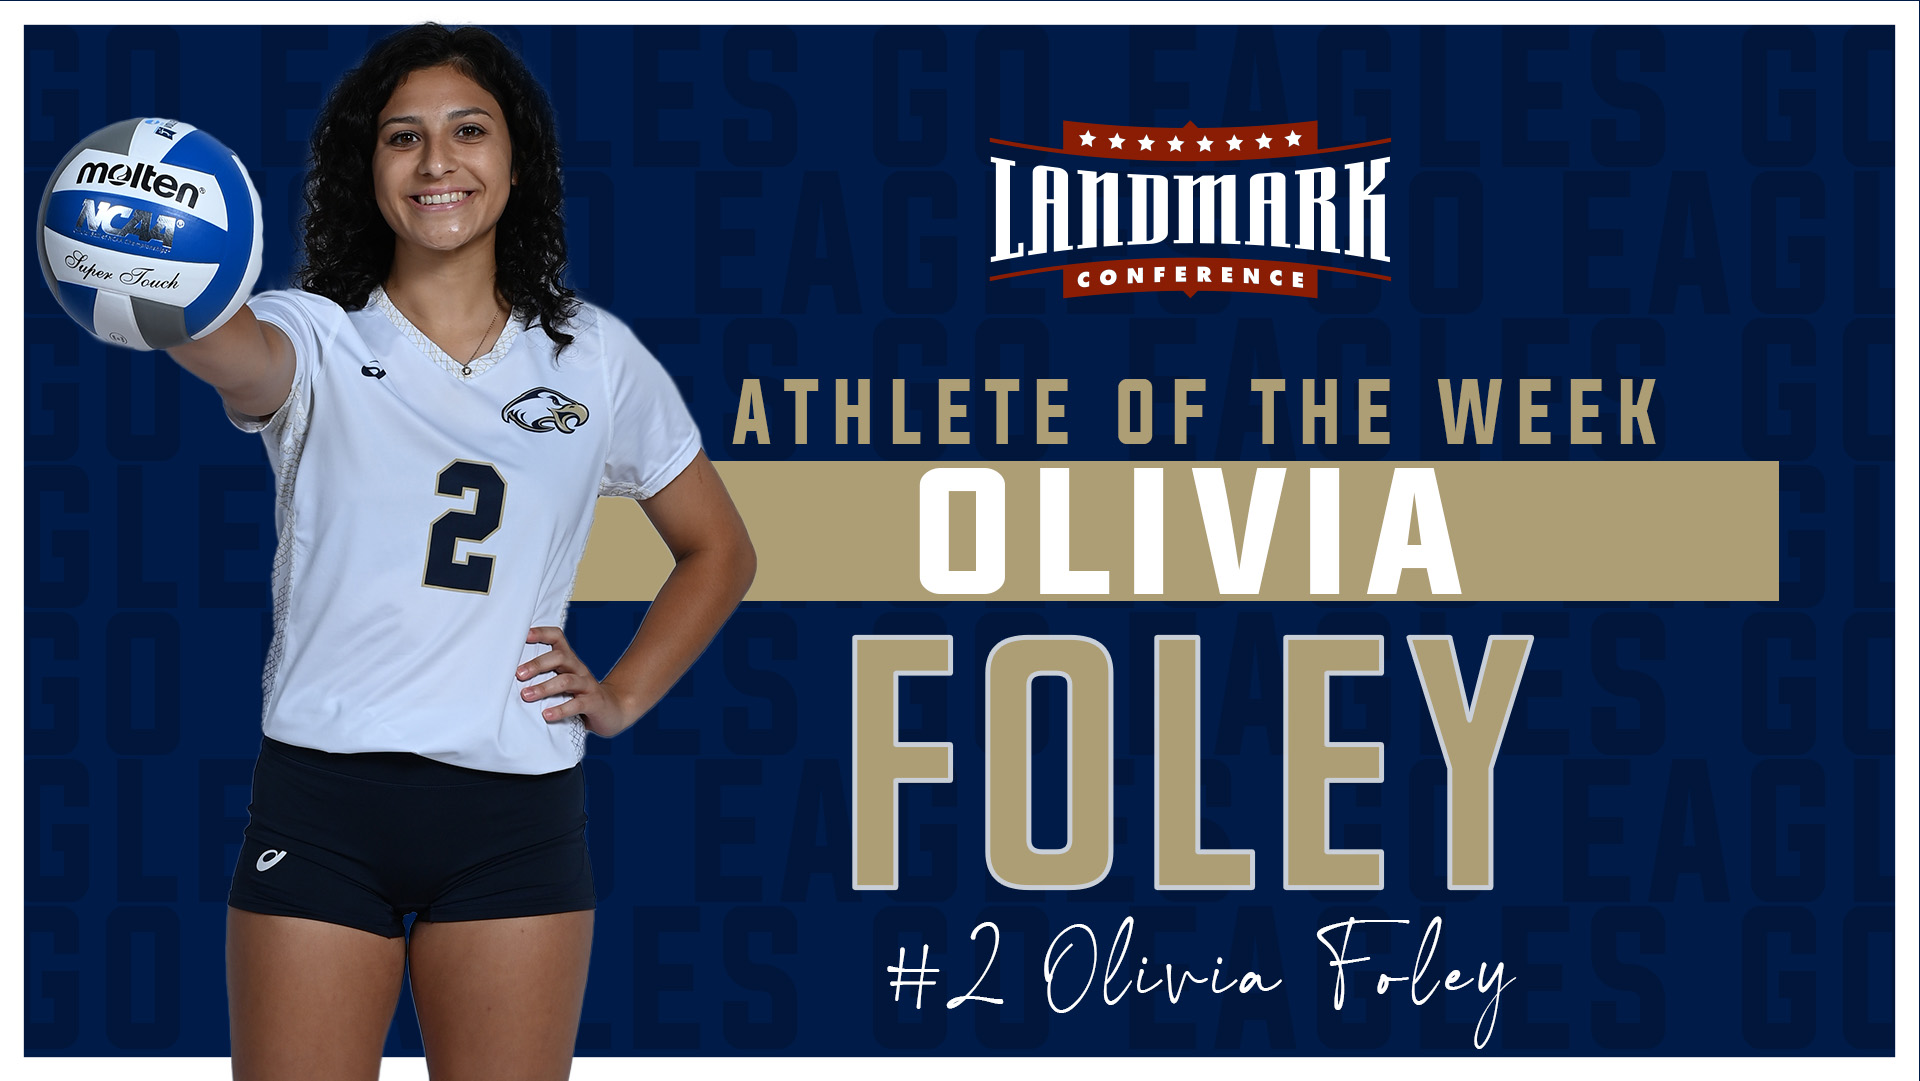 Foley Named Landmark Athlete of the Week for Women's Volleyball